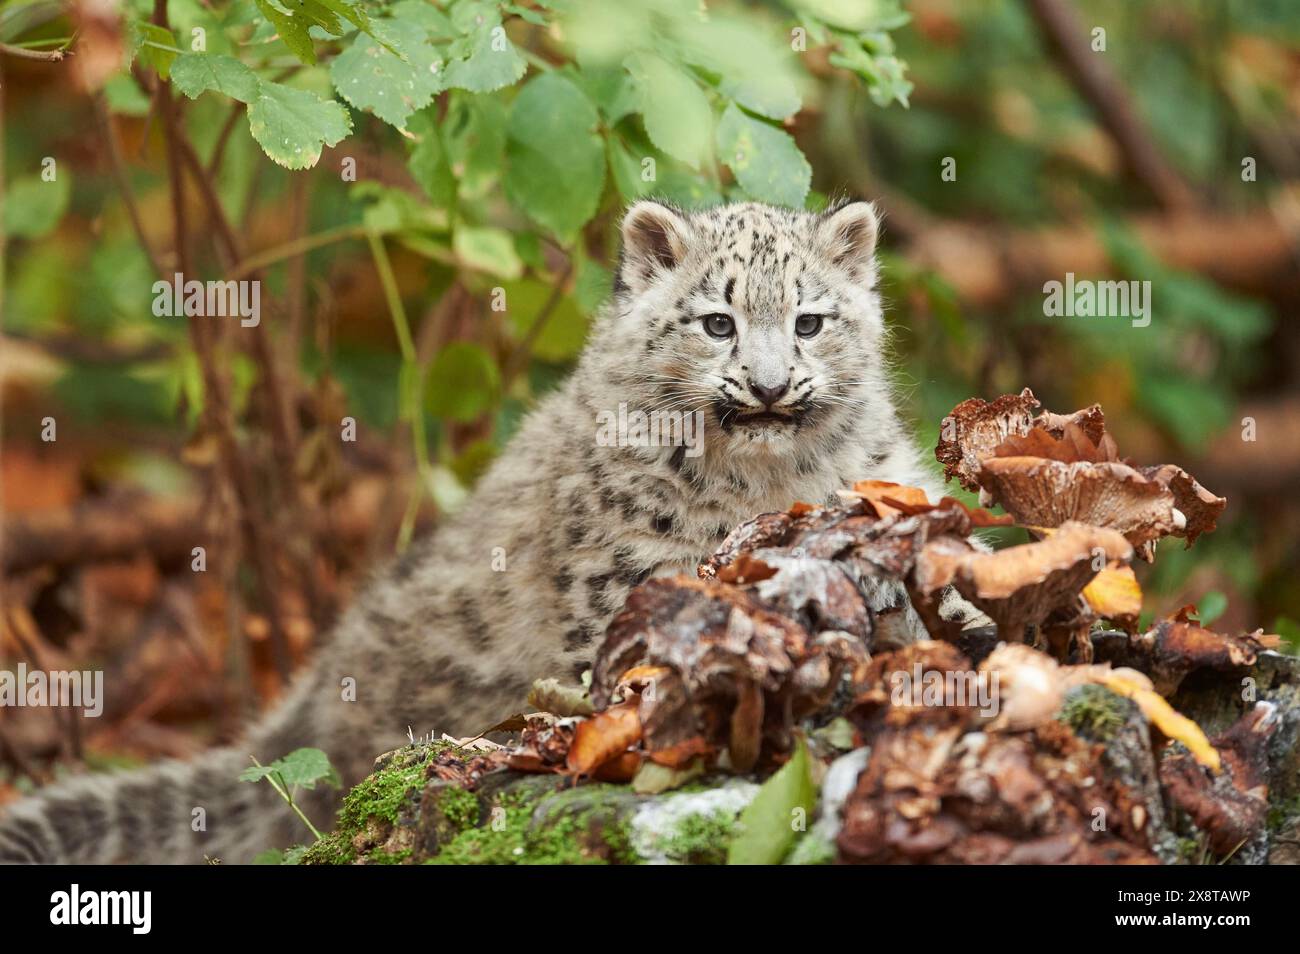 Snow leopard (Panthera uncia) or (Uncia uncia) cute cub in a forest, captive Stock Photo